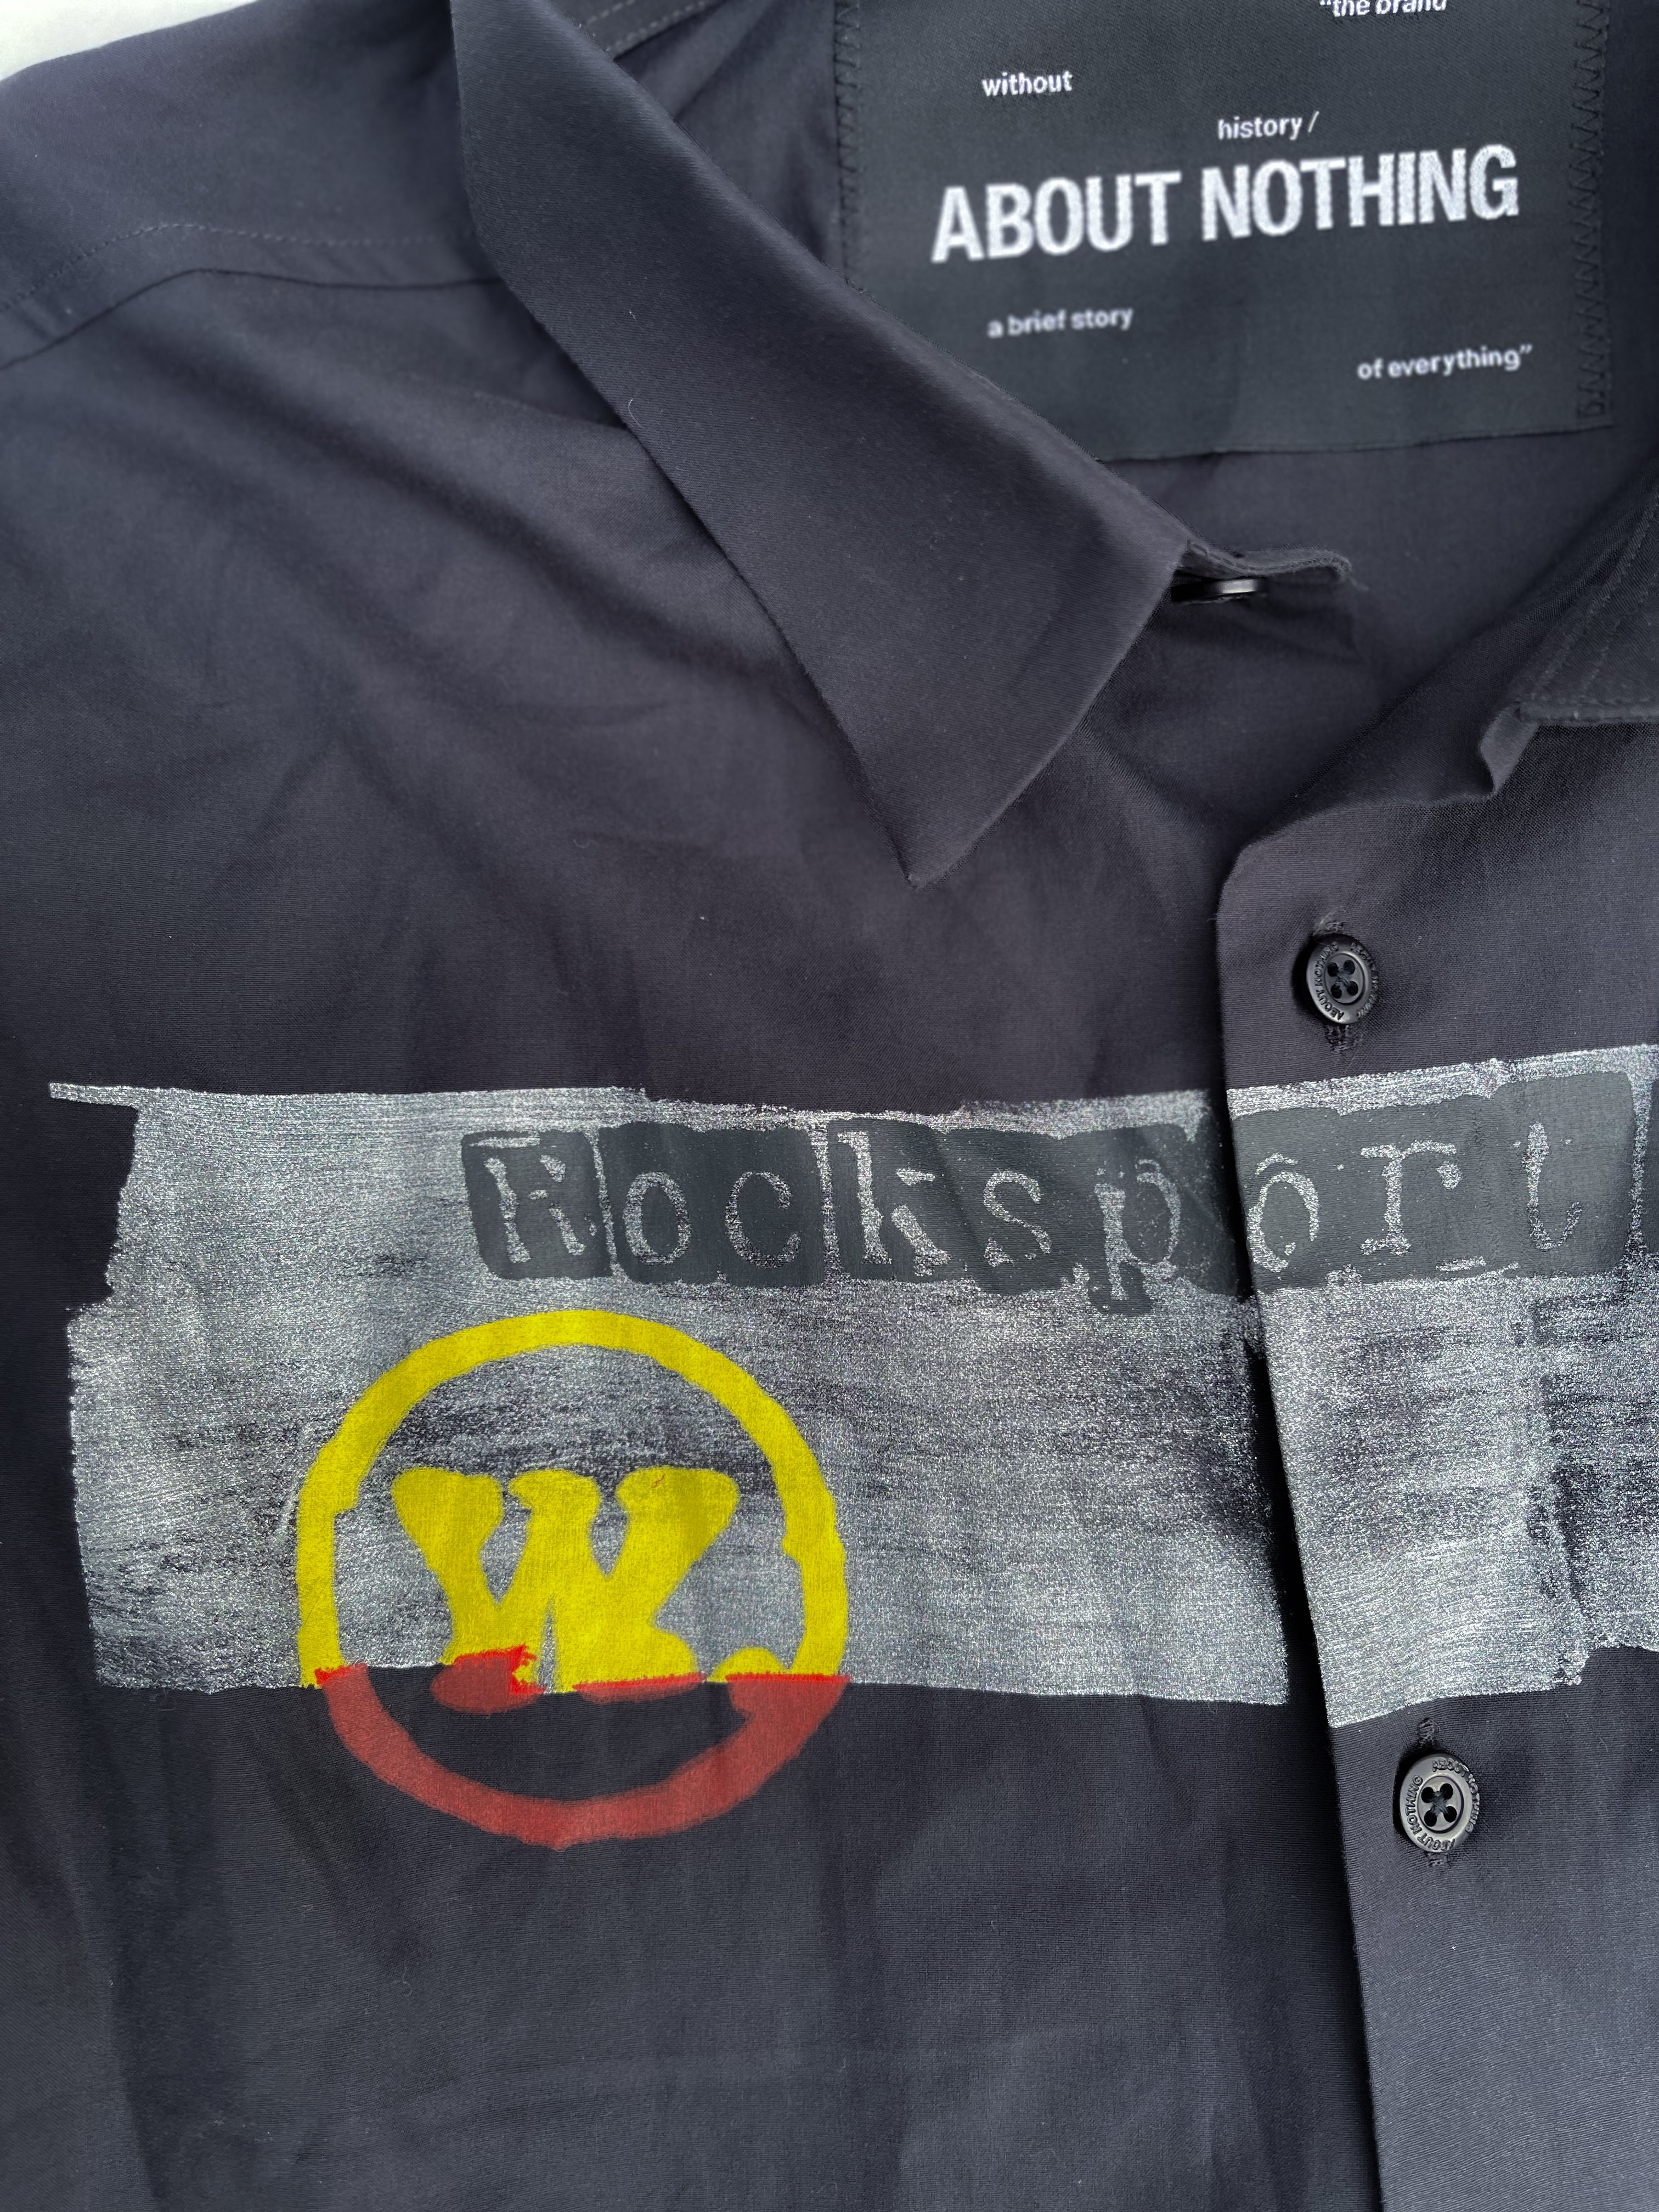 WORLDXIT x ABOUT NOTHING // 1 OF 1 ROCKSPORT SHIRT D.02 [LARGE]